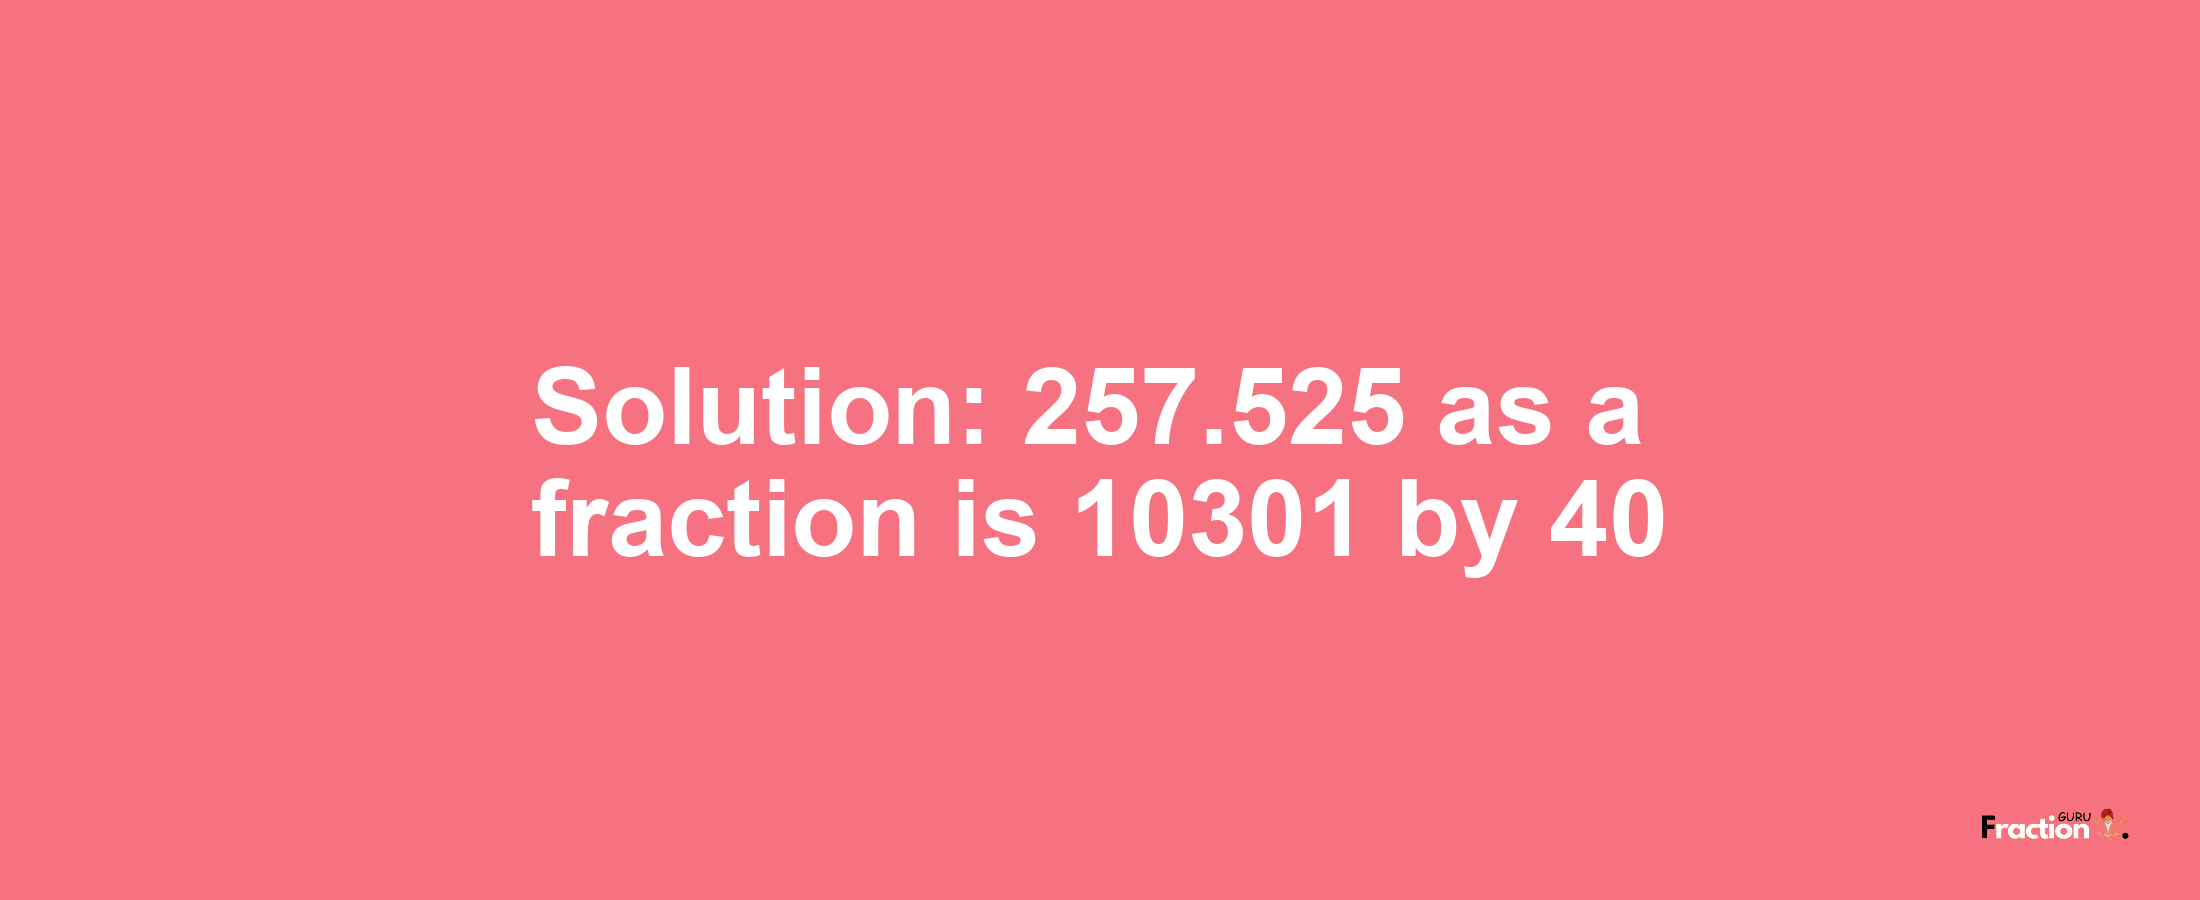 Solution:257.525 as a fraction is 10301/40